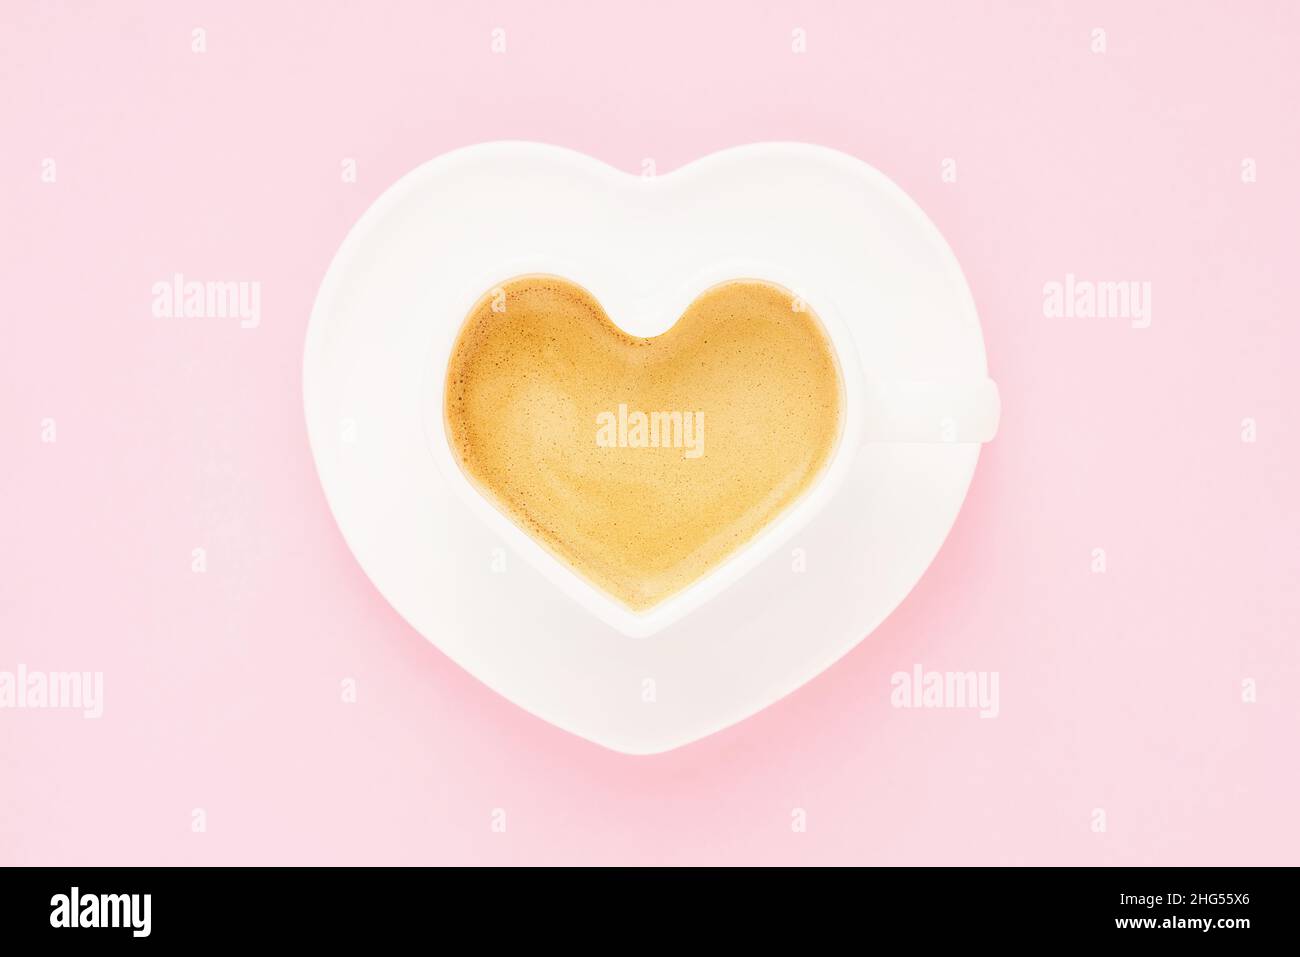 Coffee in heart shape mug on a light pink background. Valentine's day concept. Top view, copy space for text. Stock Photo